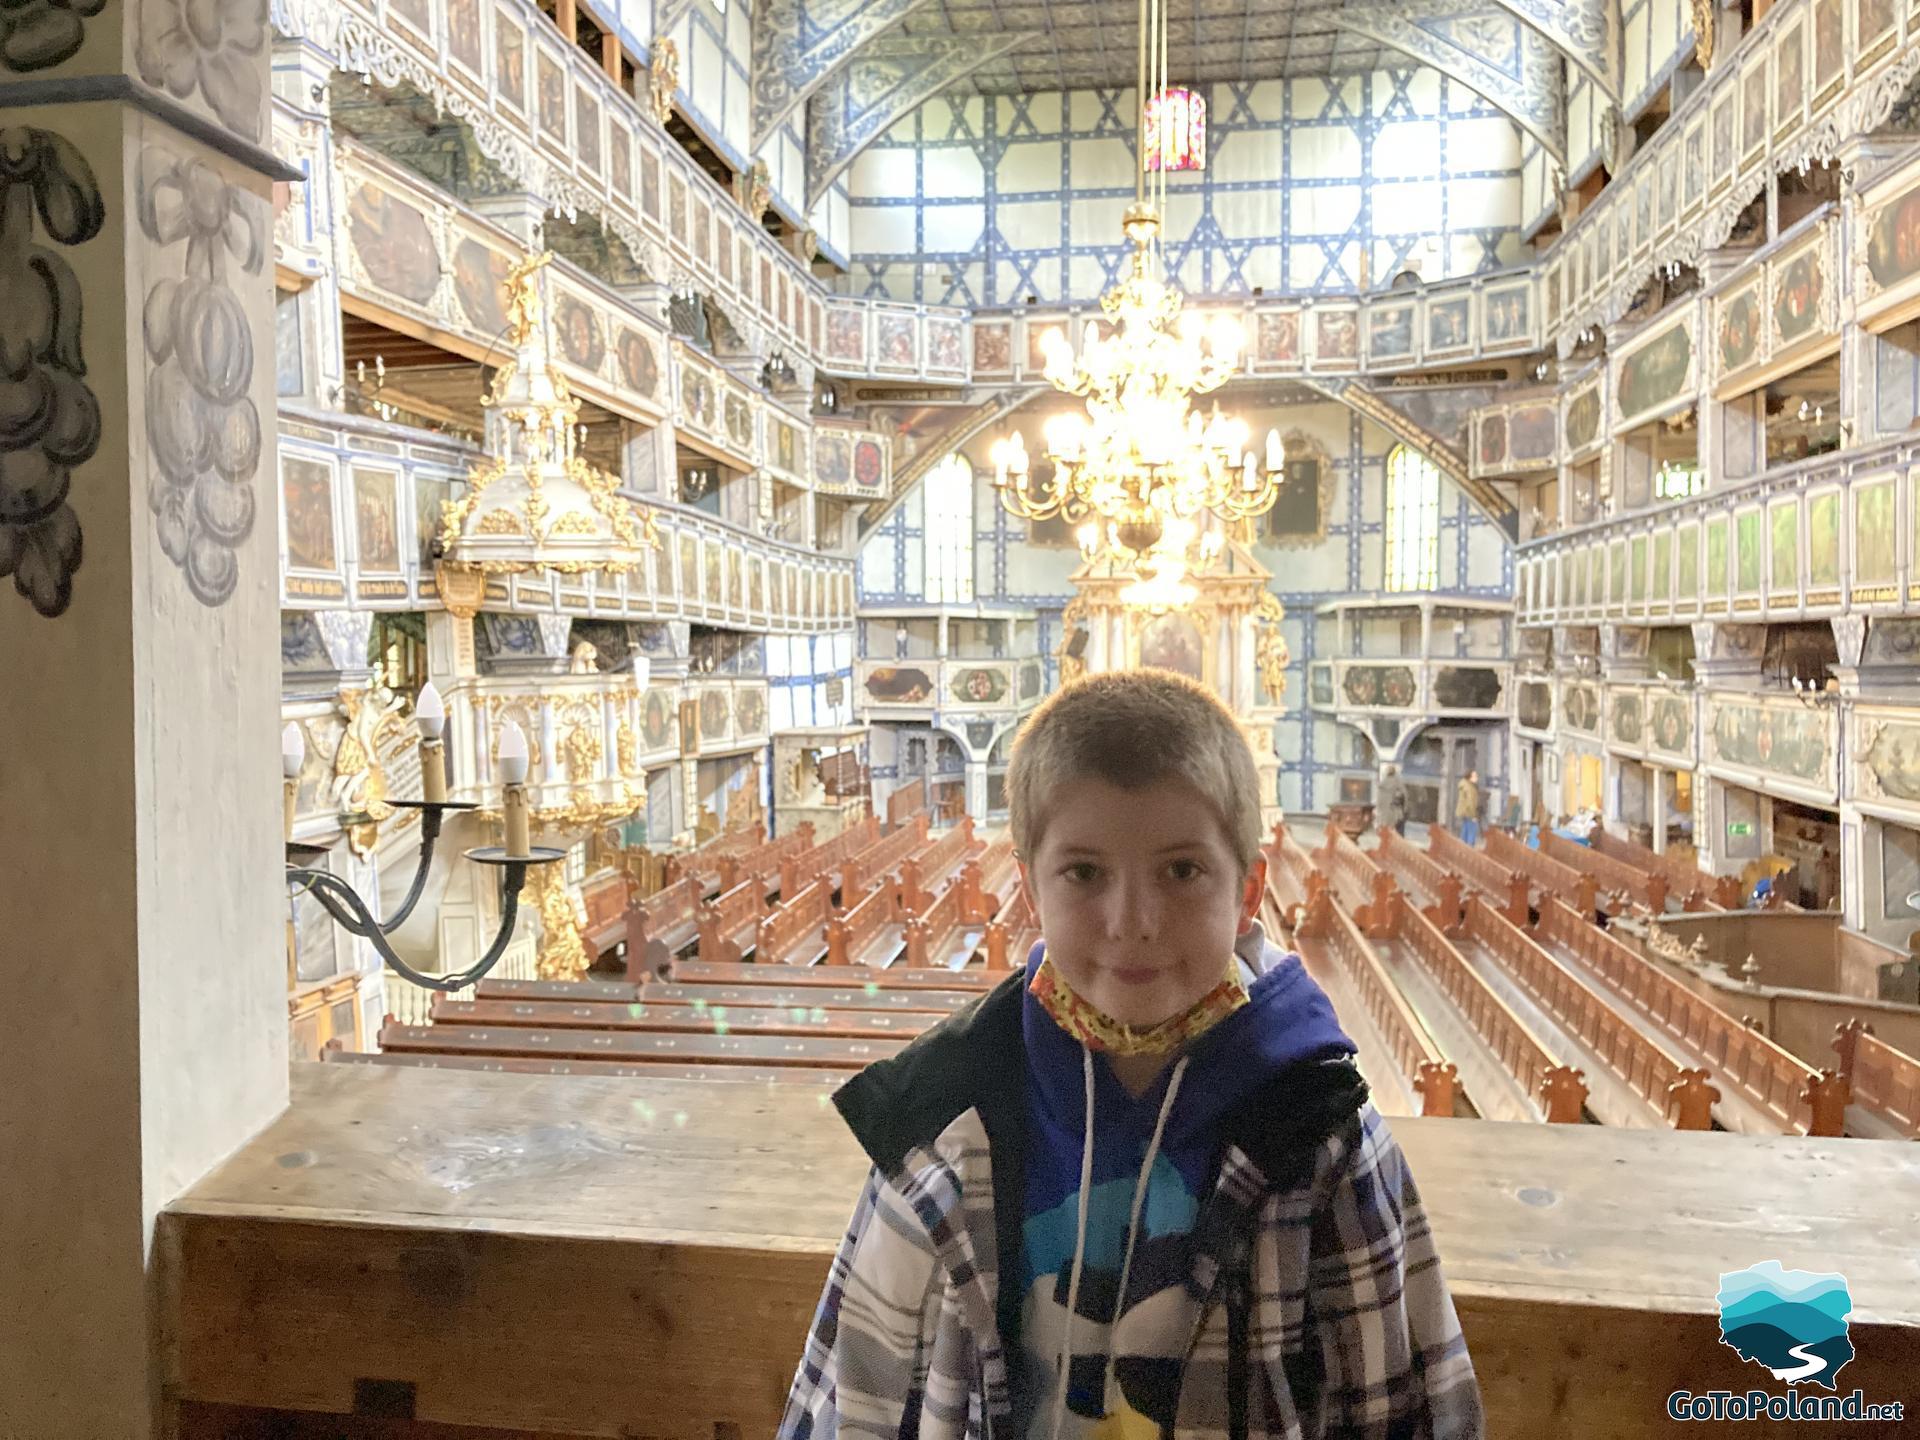 a boy is standing in a church, behind it are rows of benches